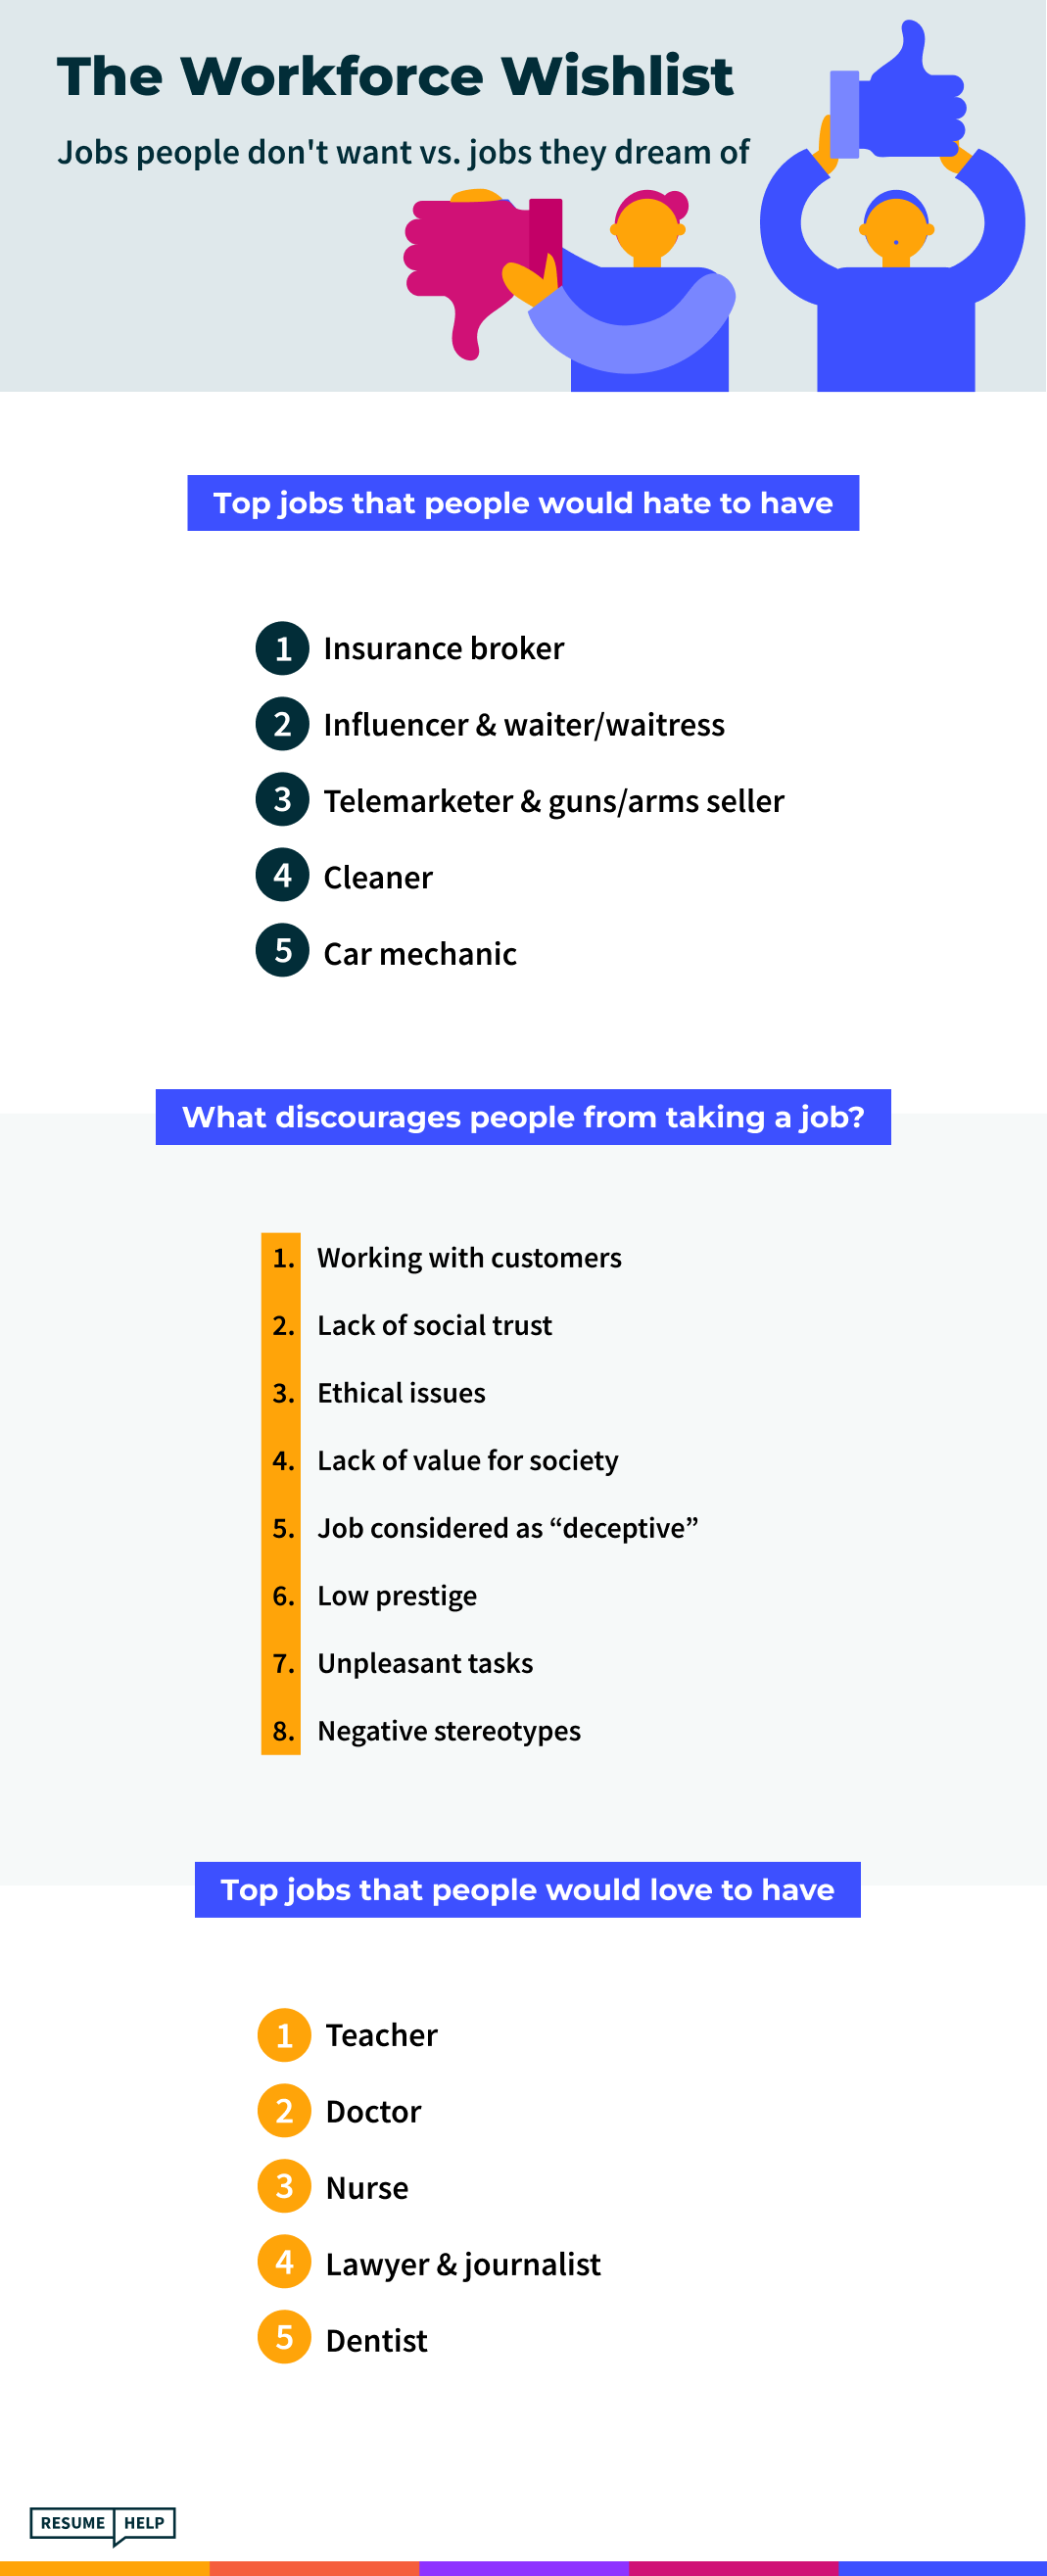 Infographic of the most loved and hated jobs. The jobs people don't want versus dream jobs.